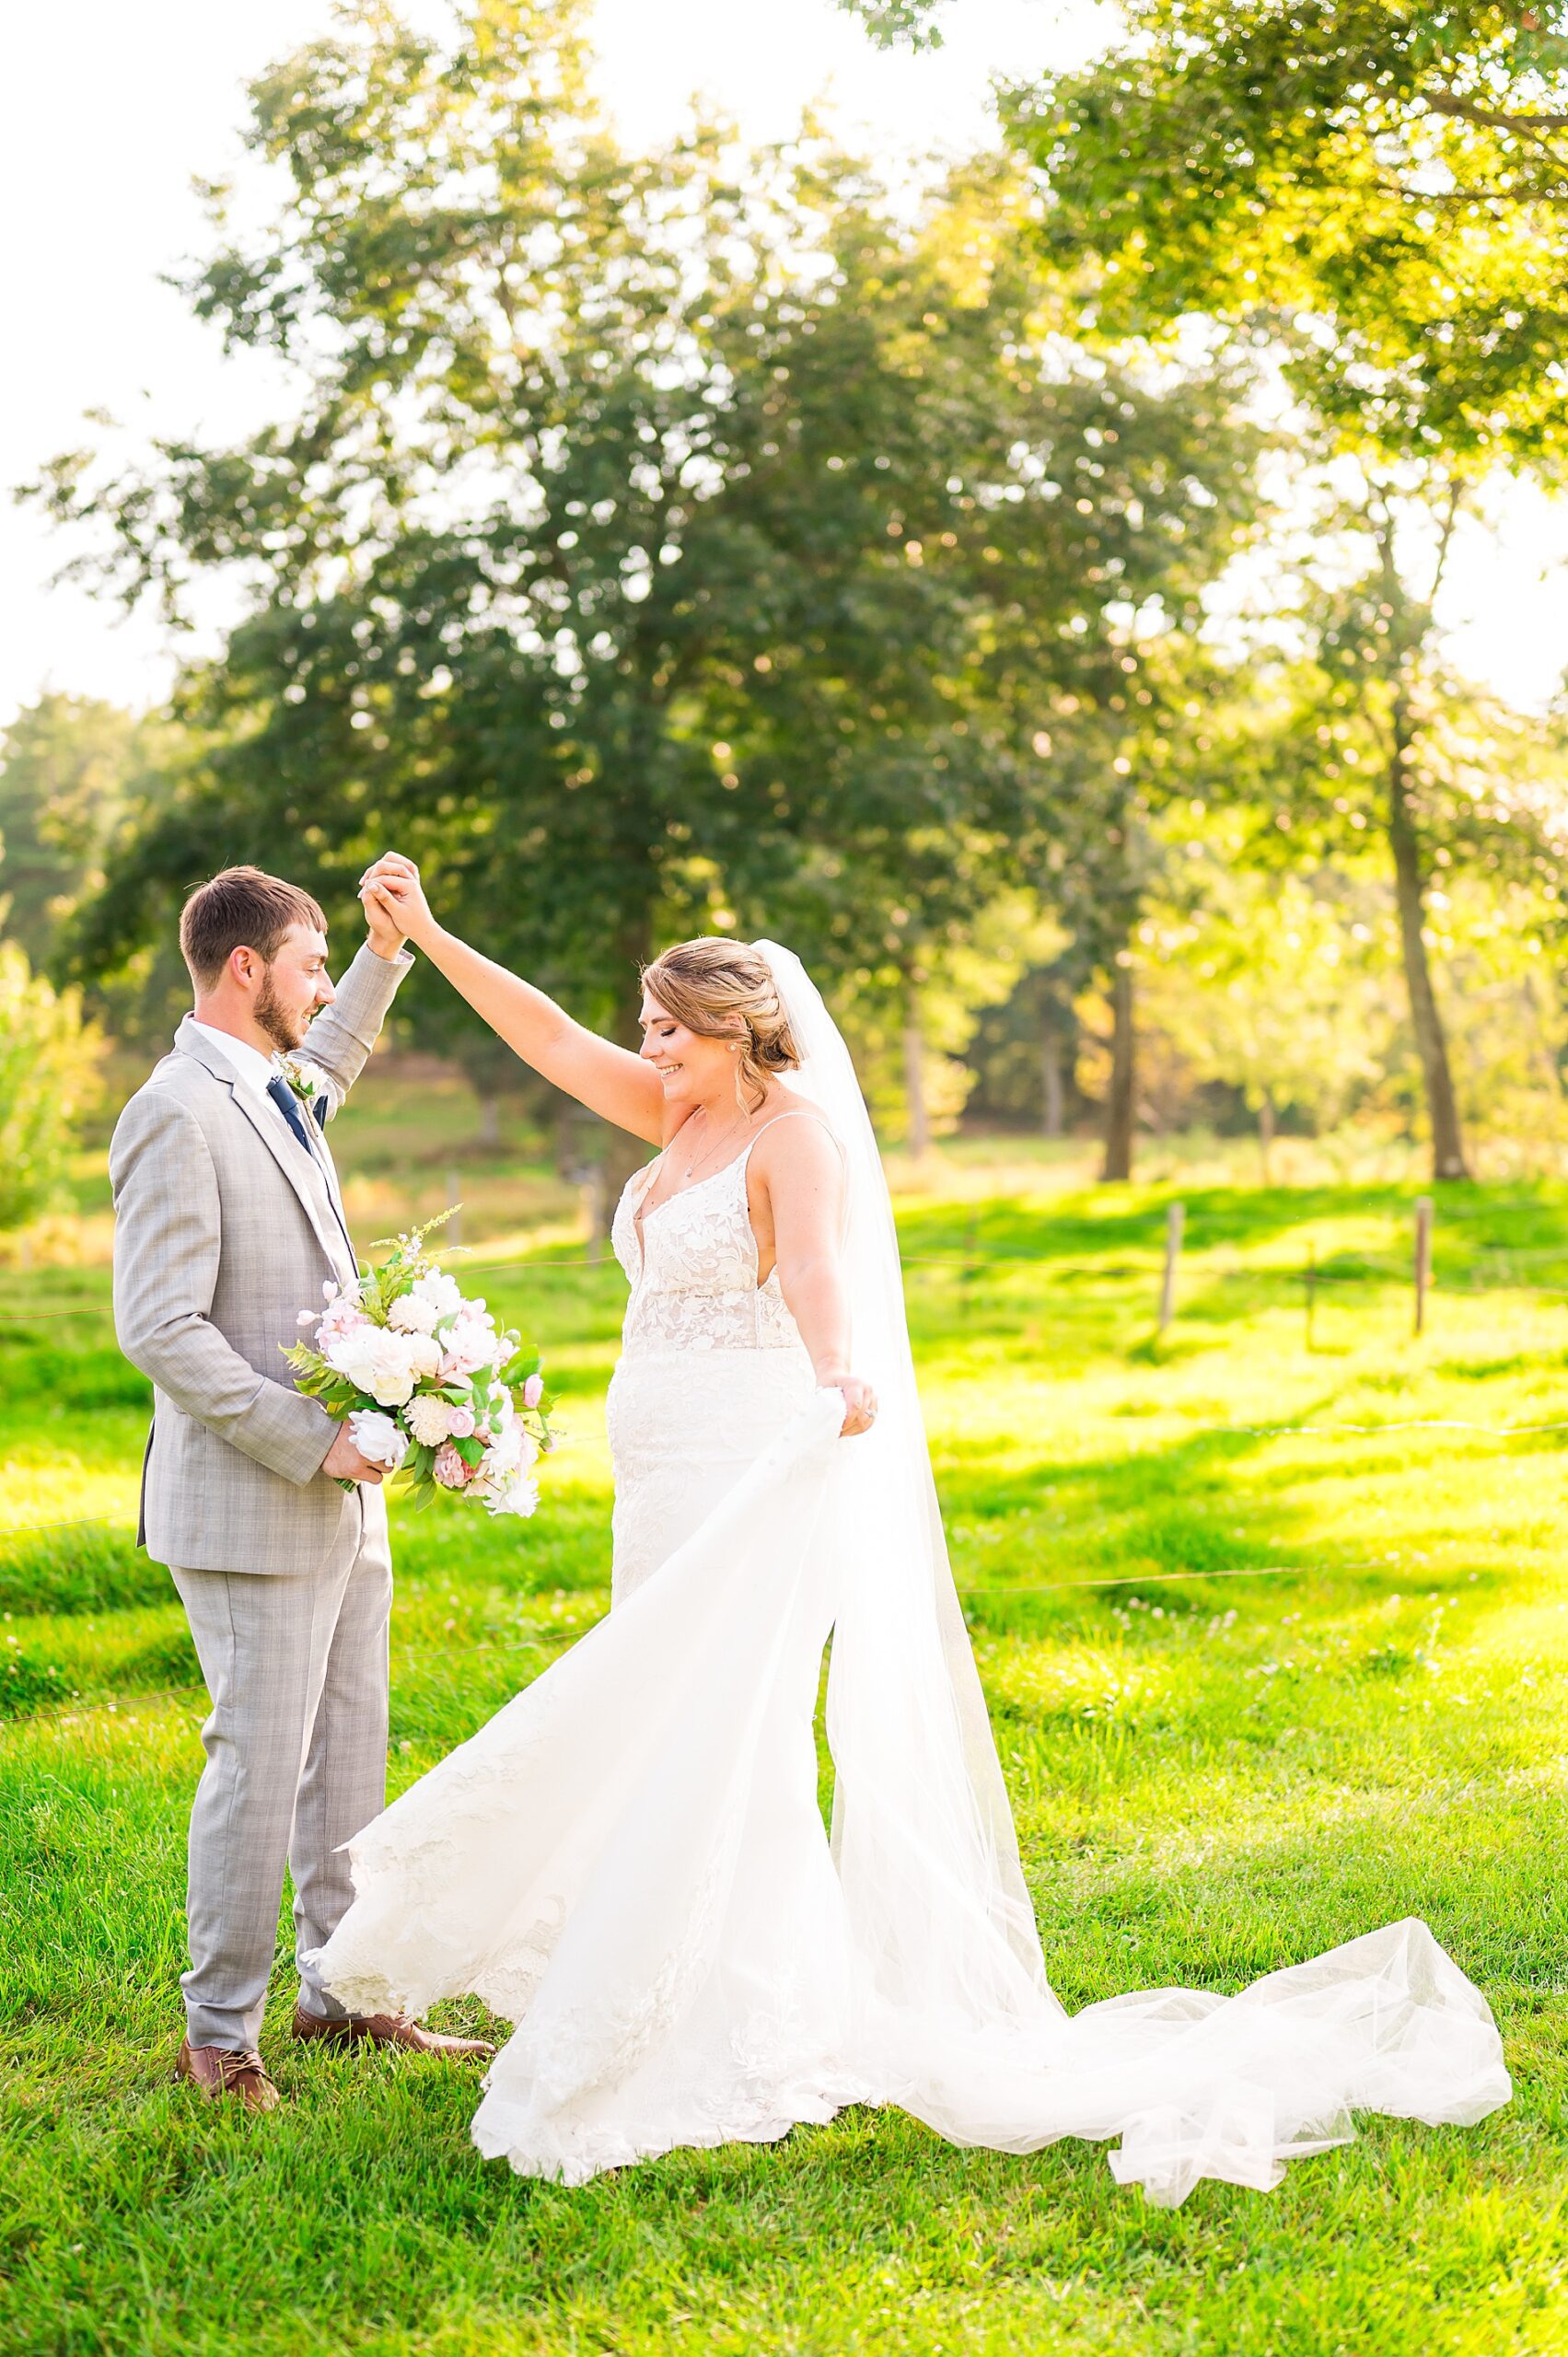 newlyweds dance outside at Tumbledown Farm after wedding ceremony 